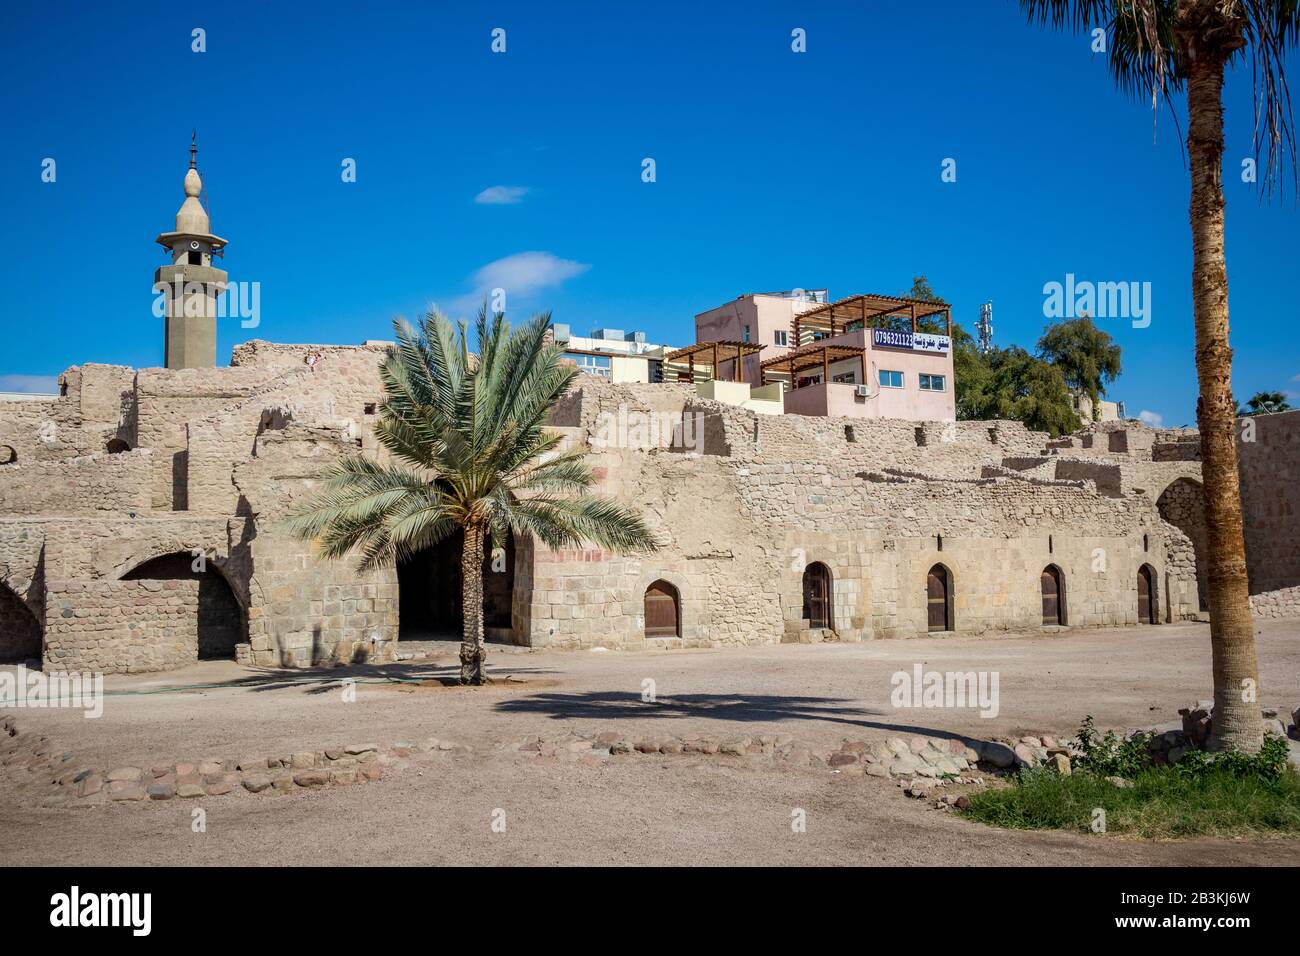 AQABA, JORDAN - JANUARY 31, 2020: Tourists can walk on fortress walls. Court yard view of Aqaba Castle. The main fort square is empty under the sunlight. Sunny winter day. Clear cloudless blue sky Stock Photo